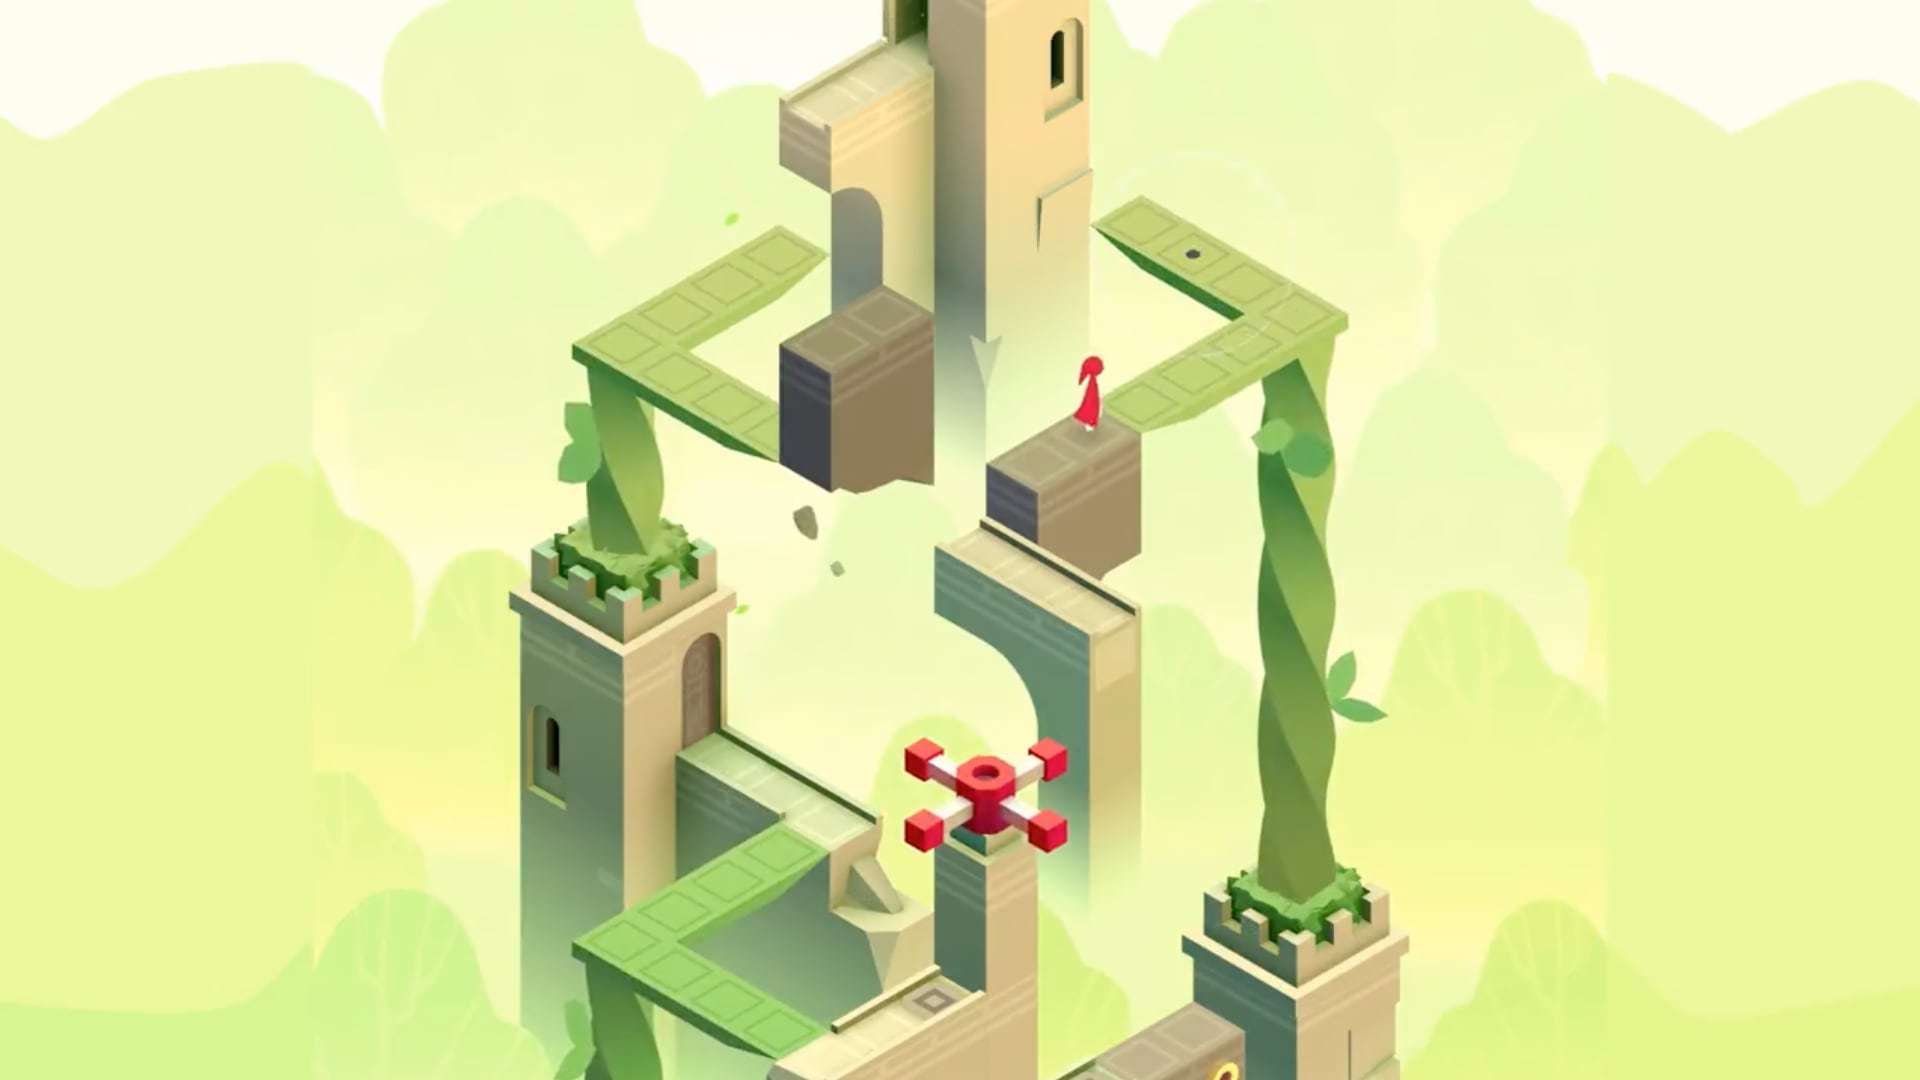 A scene from The Lost Forest level from the Monument Valley 2 game